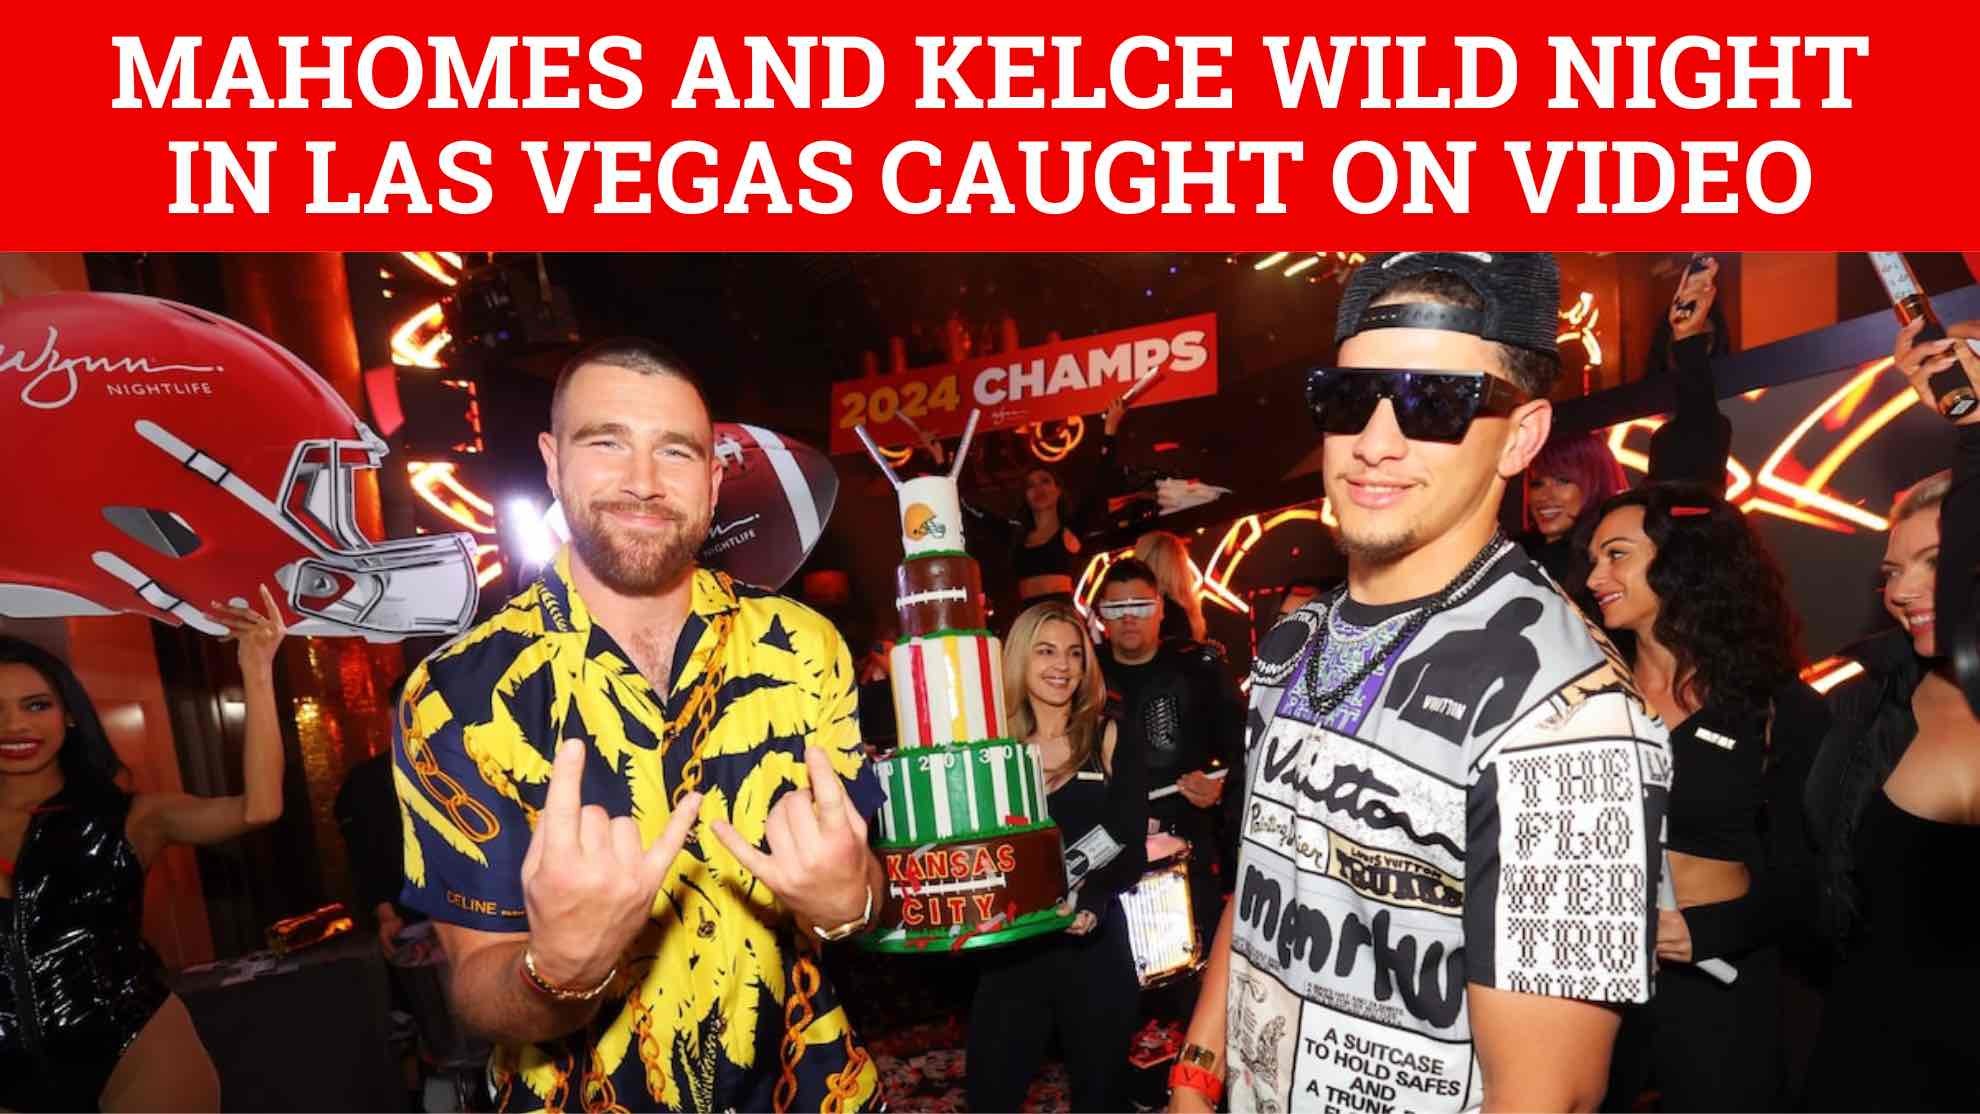 Patrick Mahomes and Travis Kelce party in Las Vegas like there is no tomorrow